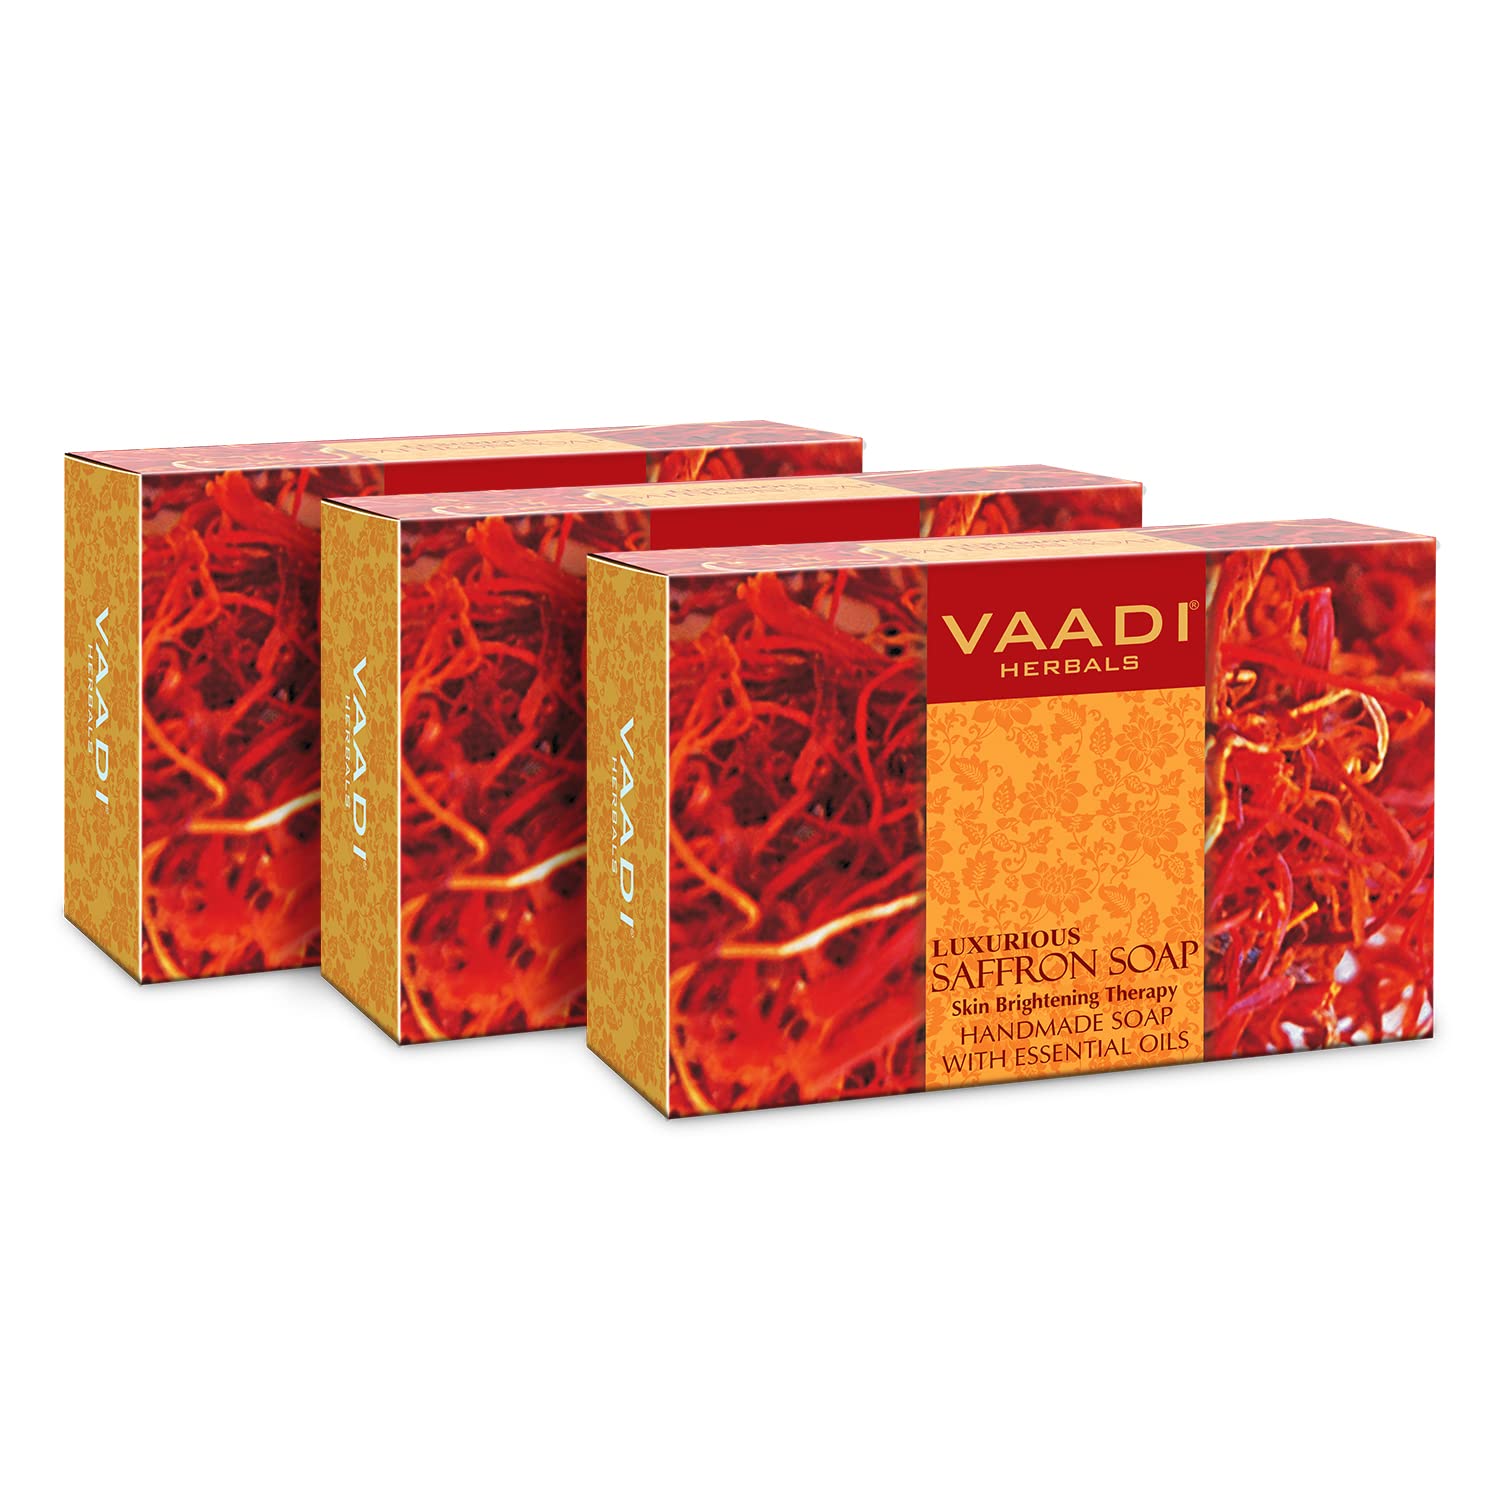 Vaadi Herbals Super Value Luxurious Saffron Skin Whitening Therapy Soap, 75g (Pack Of 6)